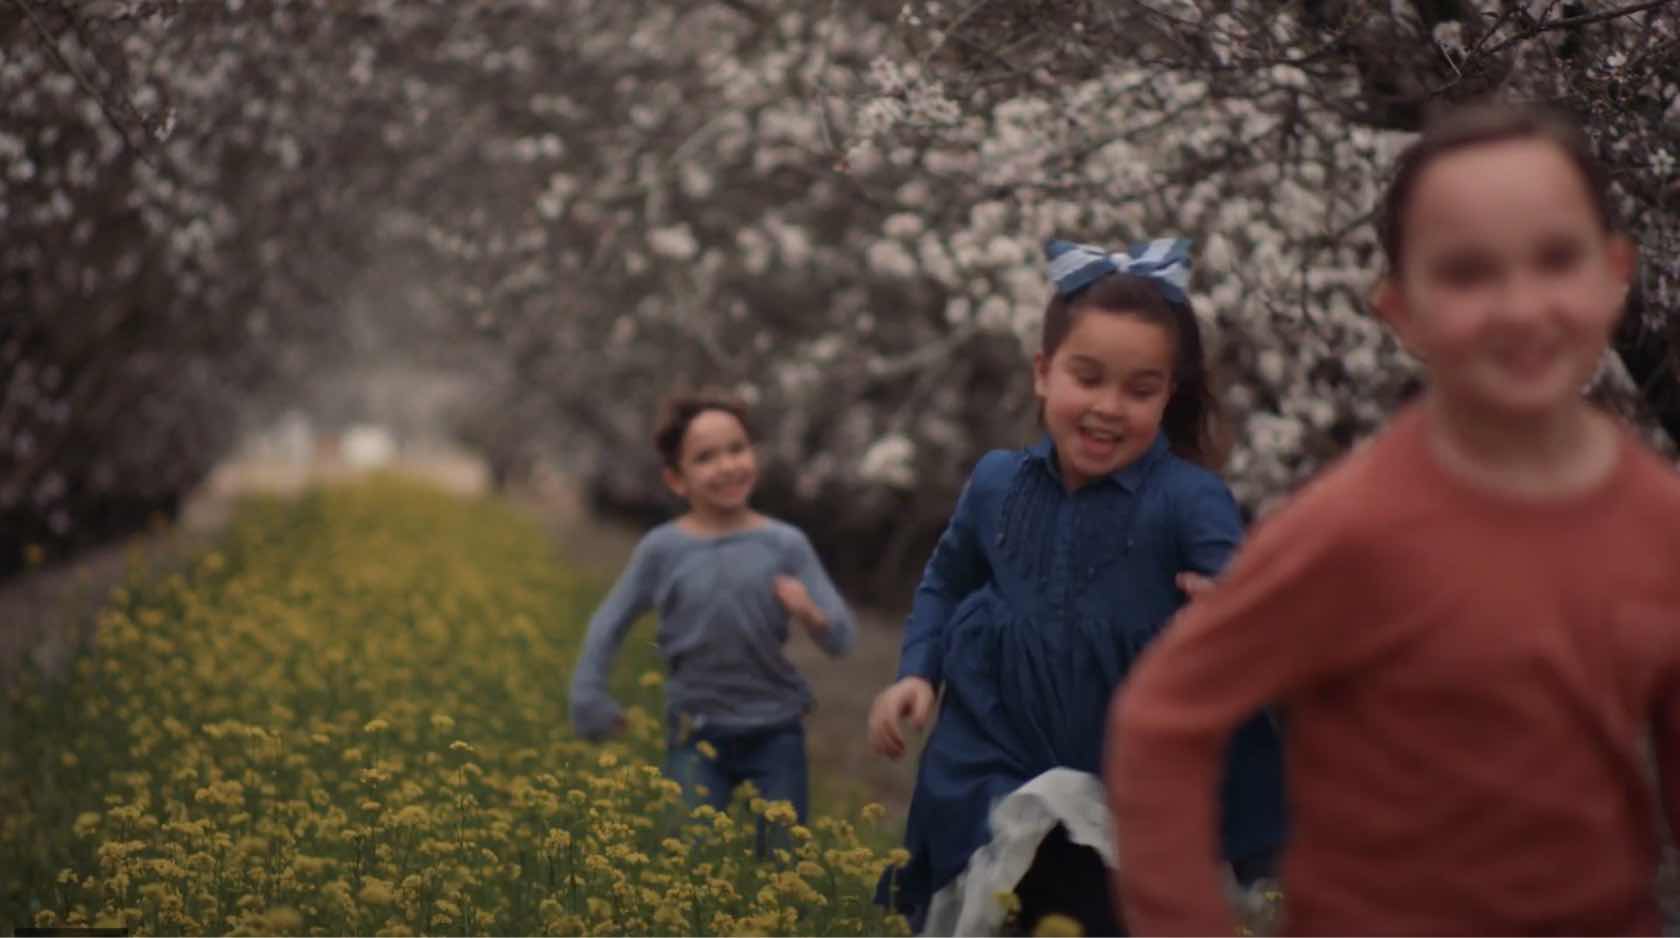 3 kids in almond flour orchard